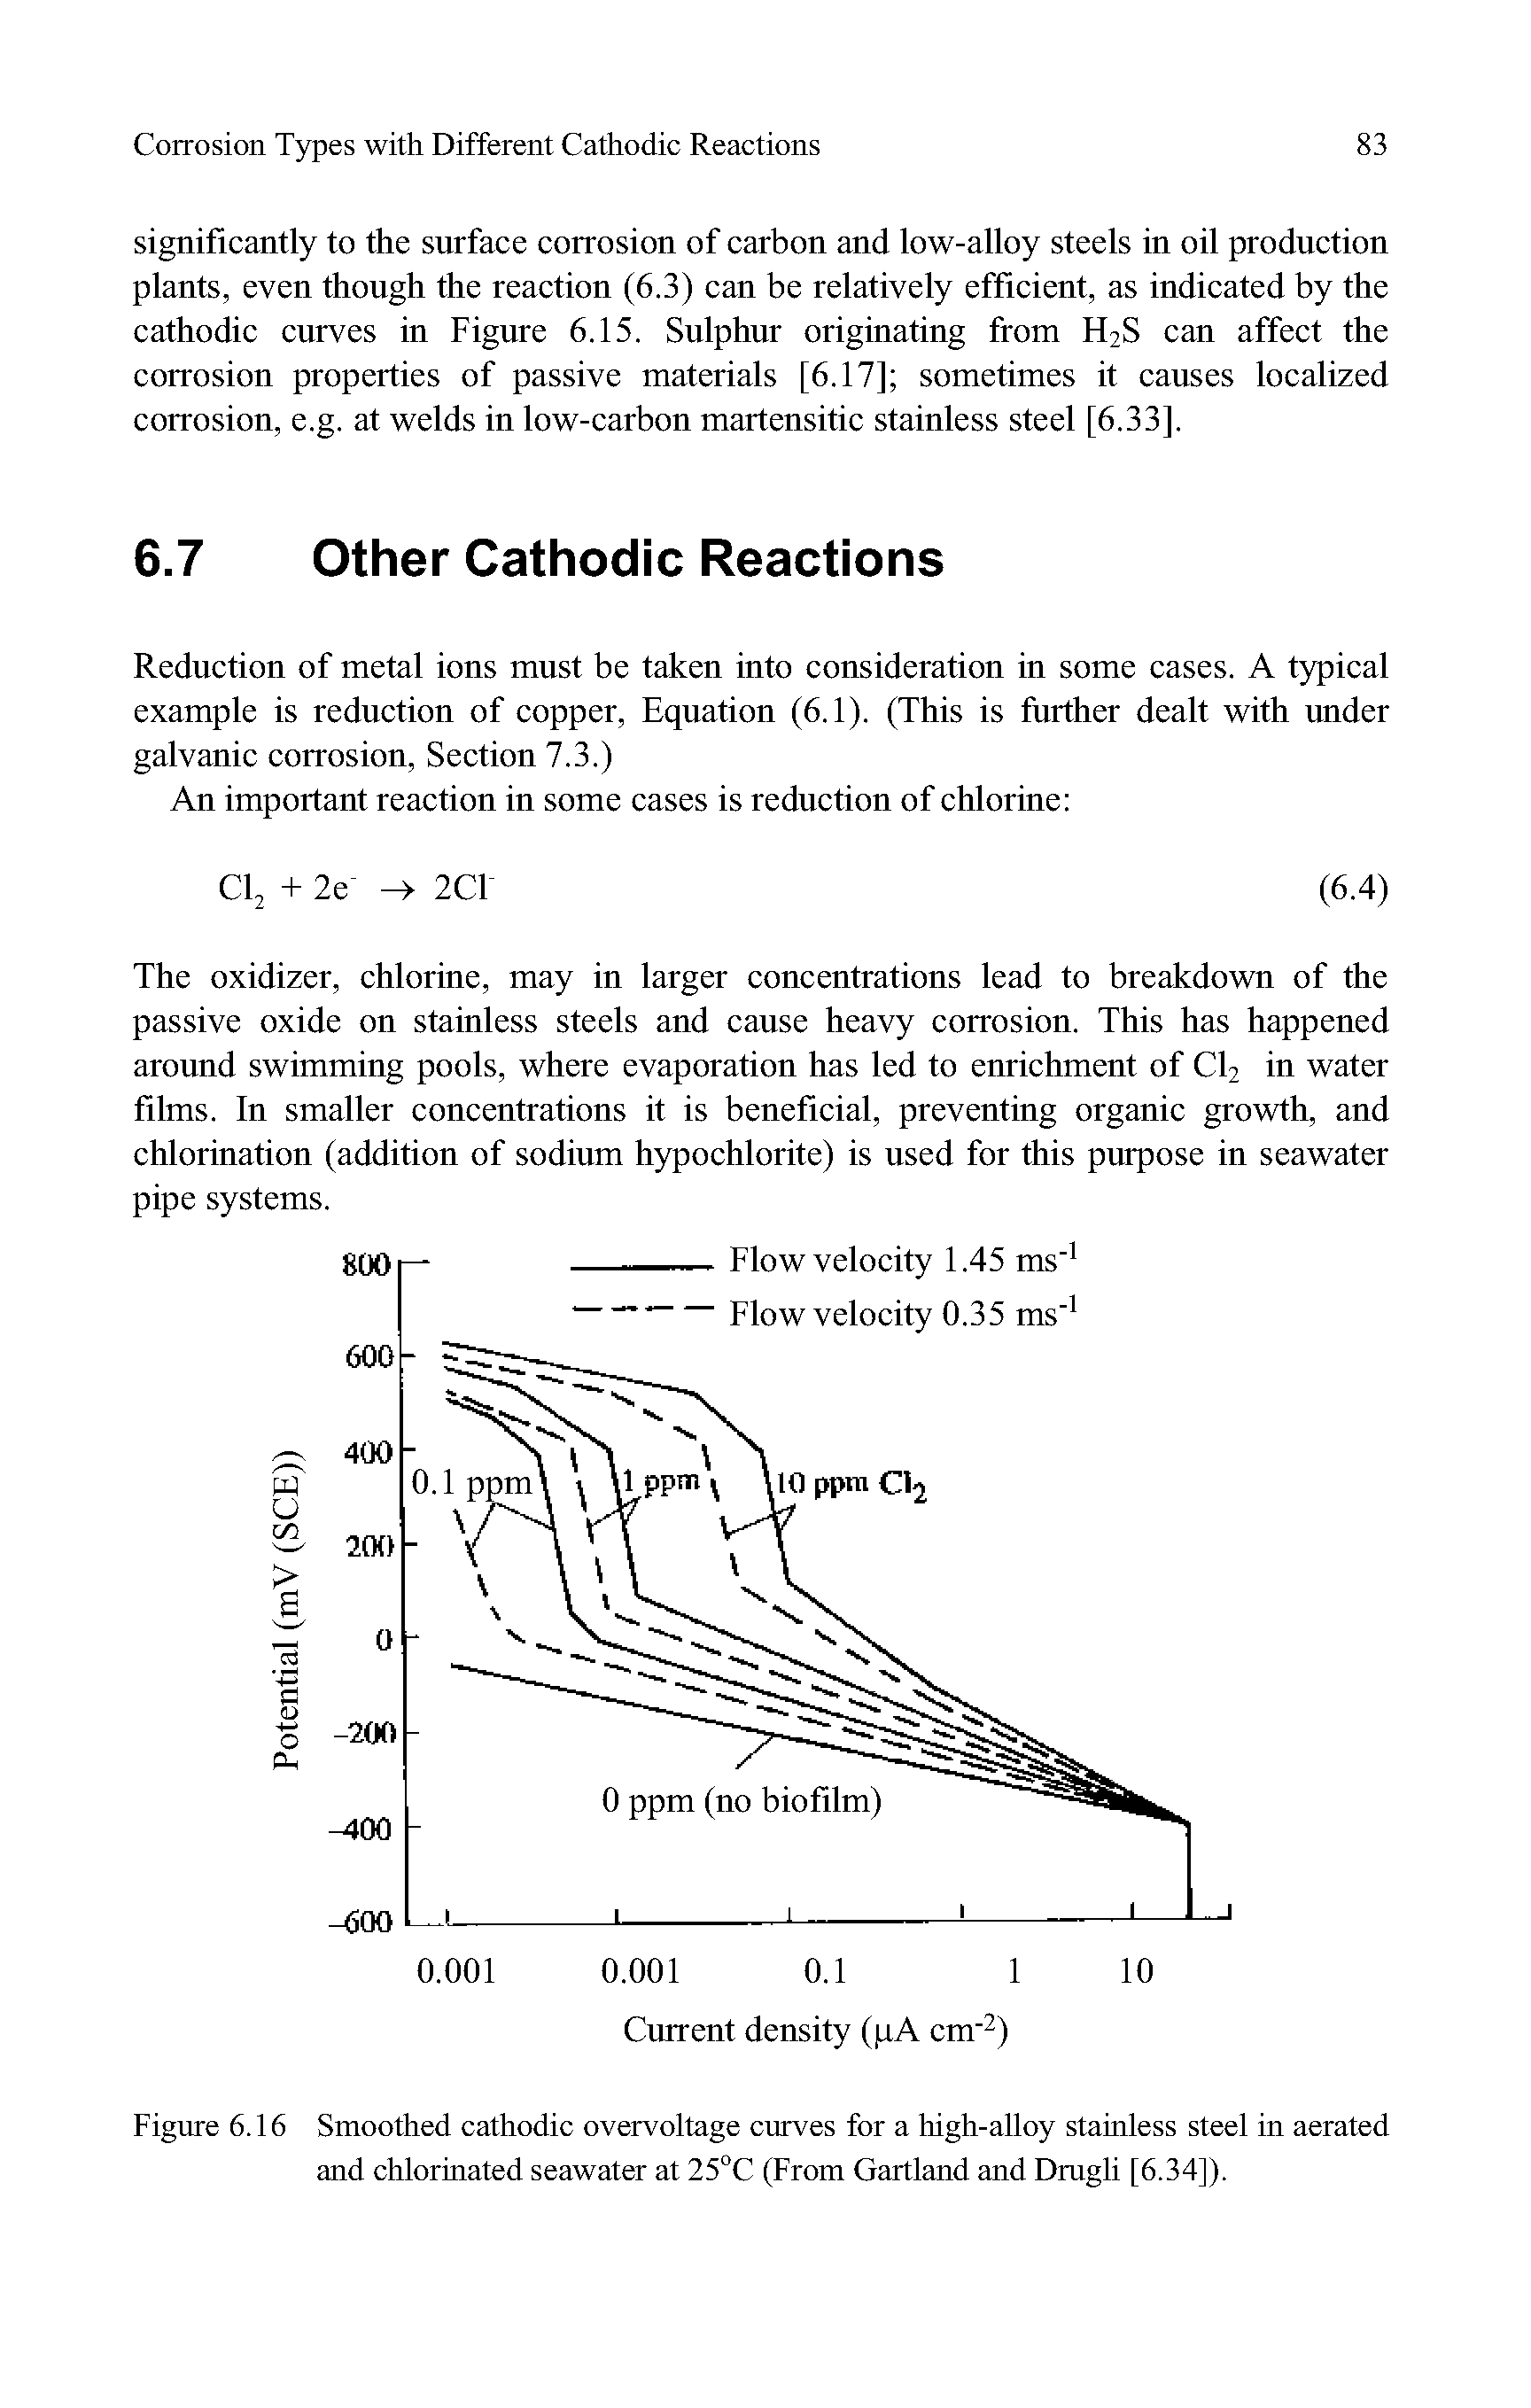 Figure 6.16 Smoothed cathodic overvoltage curves for a high-alloy stainless steel in aerated and chlorinated seawater at 25 C (From Gartland and Drugli [6.34]).